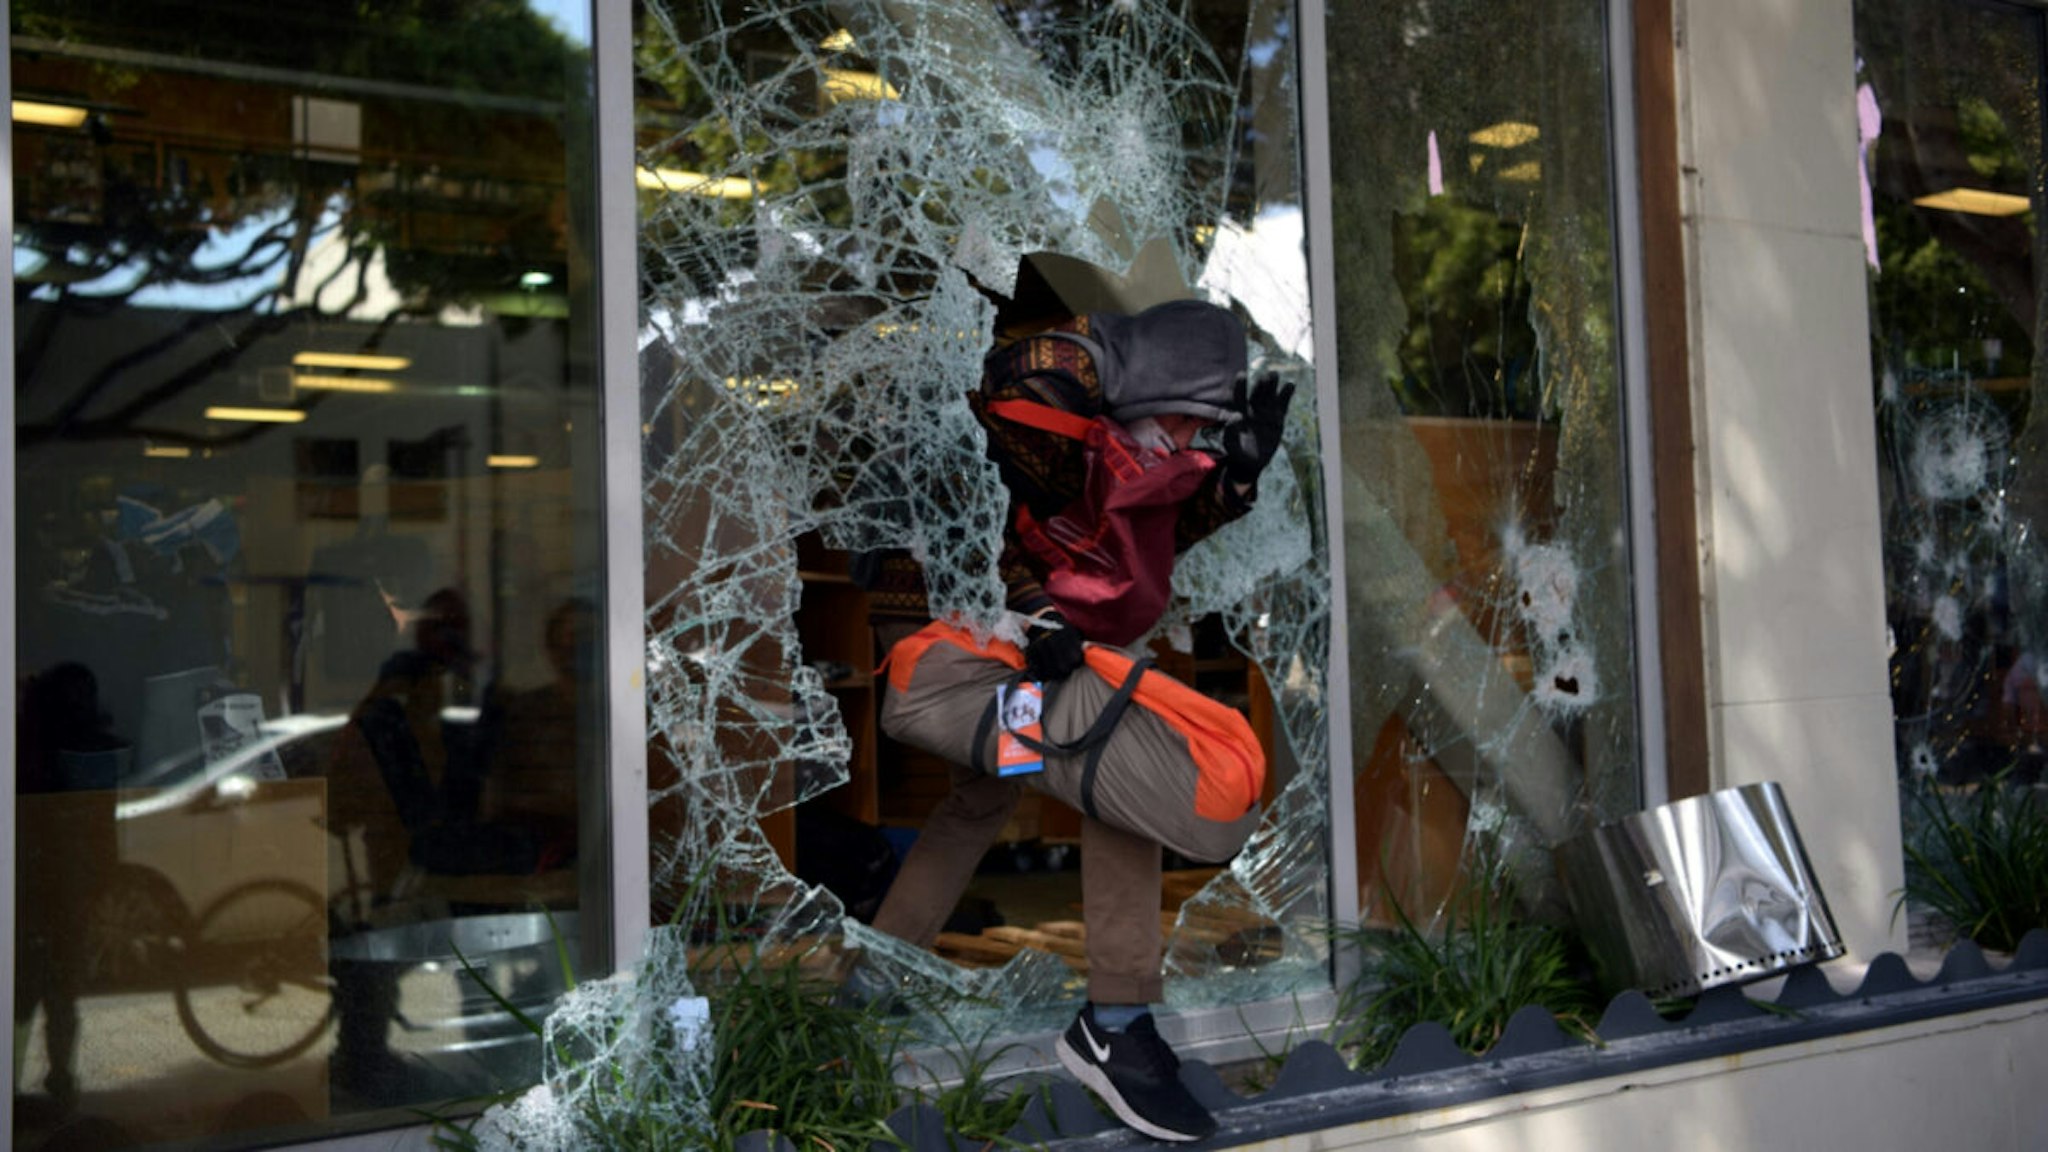 Protesters loot shops during a demonstration over the death of George Floyd at the hands of Minneapolis Police, in Santa Monica, California, on May 31, 2020.